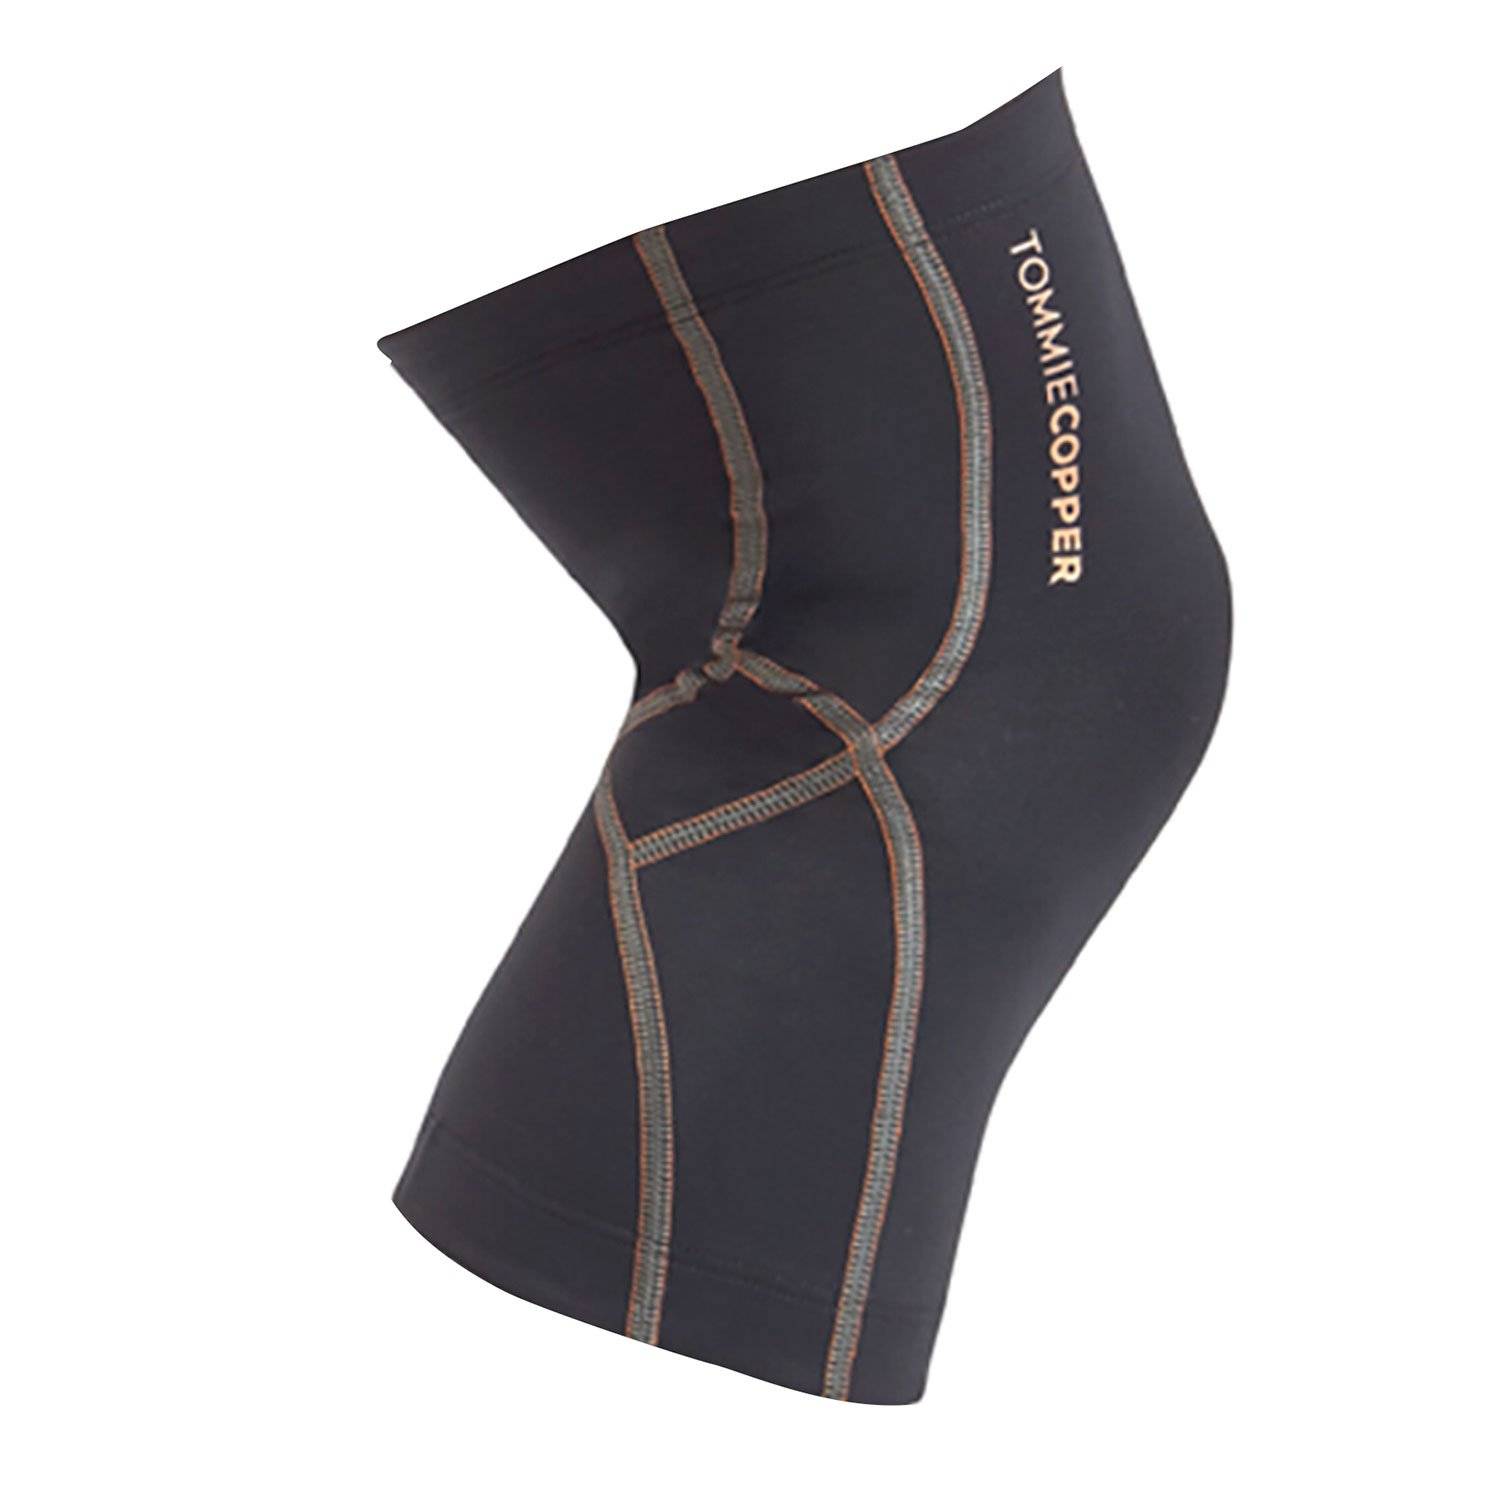 Tommie Copper Men's Performance Compression Knee Sleeve.